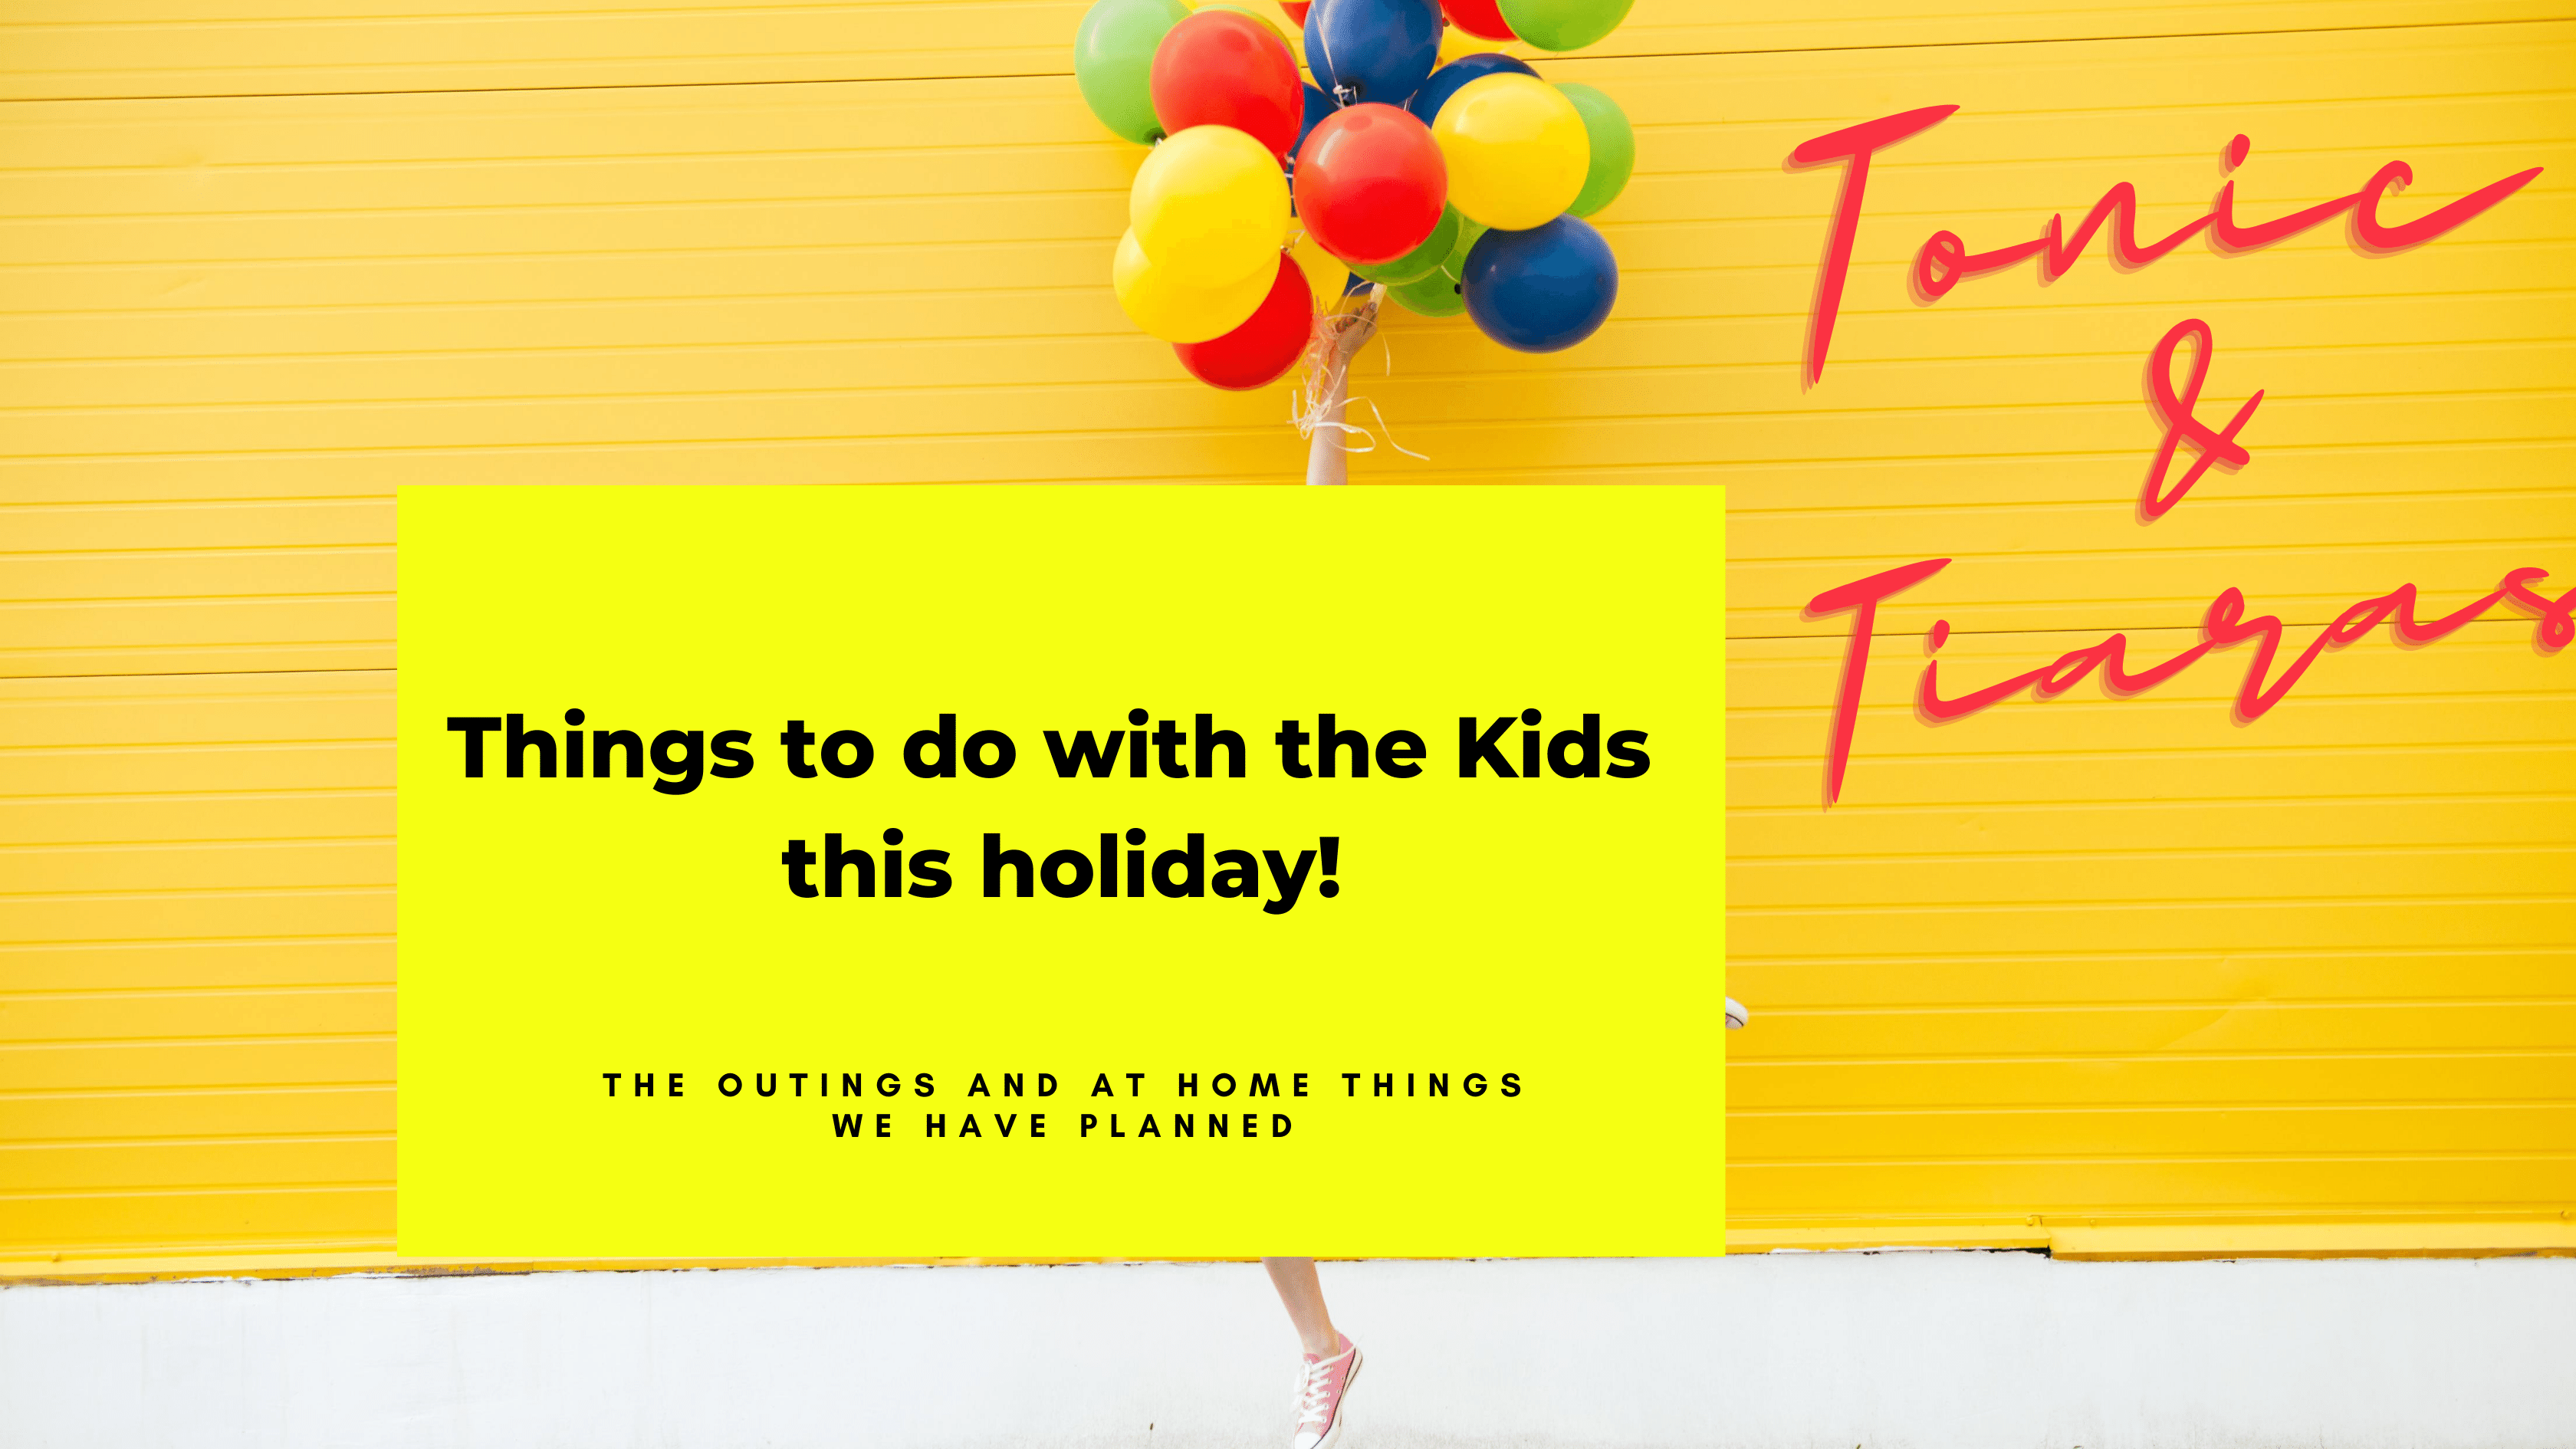 Things to do with kids